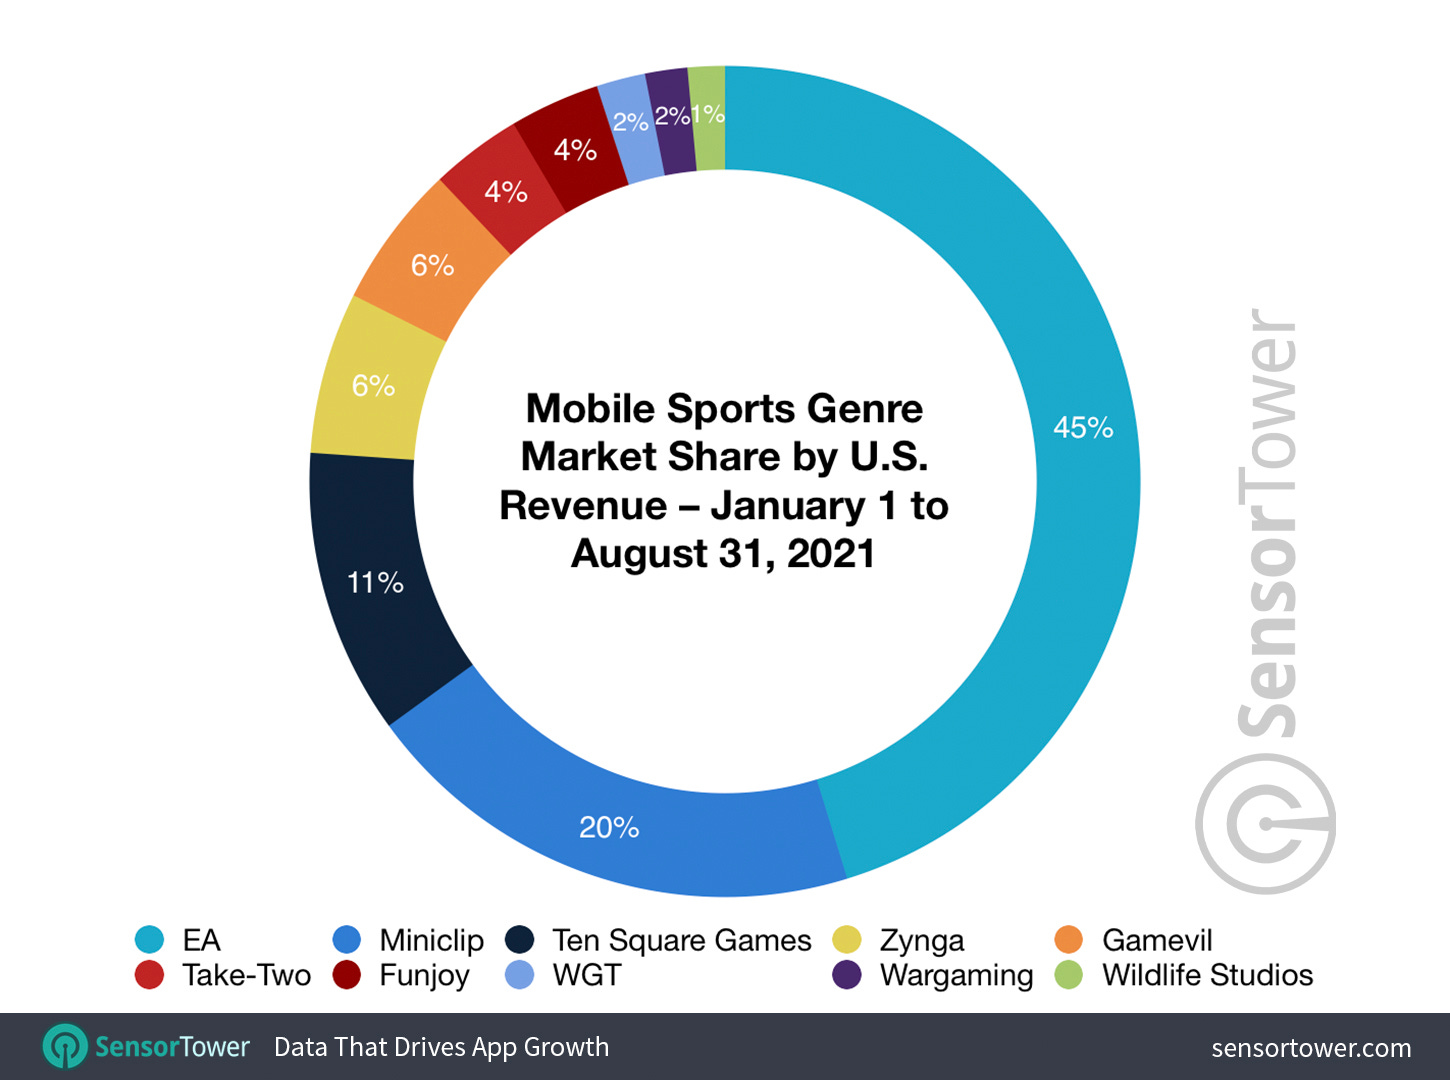 Mobile Sports Genre Market Share by U.S. Revenue – January 1 to August 31, 2021